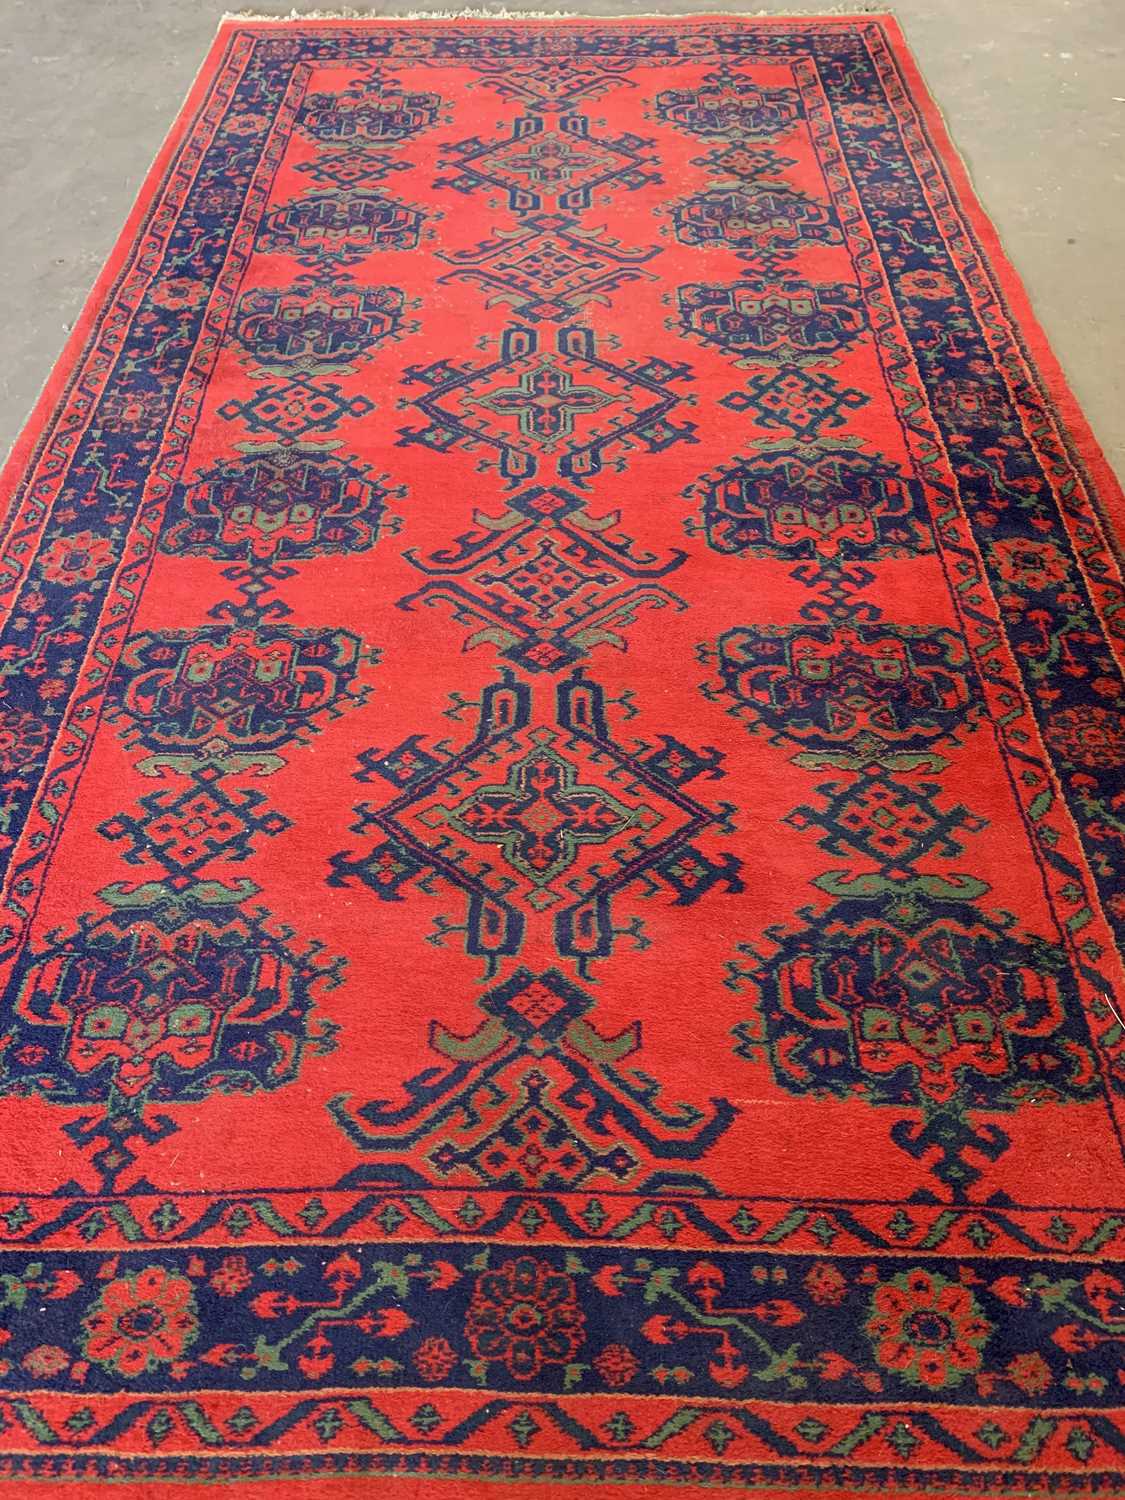 EASTERN STYLE WOOLLEN RUG, red and blue ground with repeating central pattern, 370 x 202cms